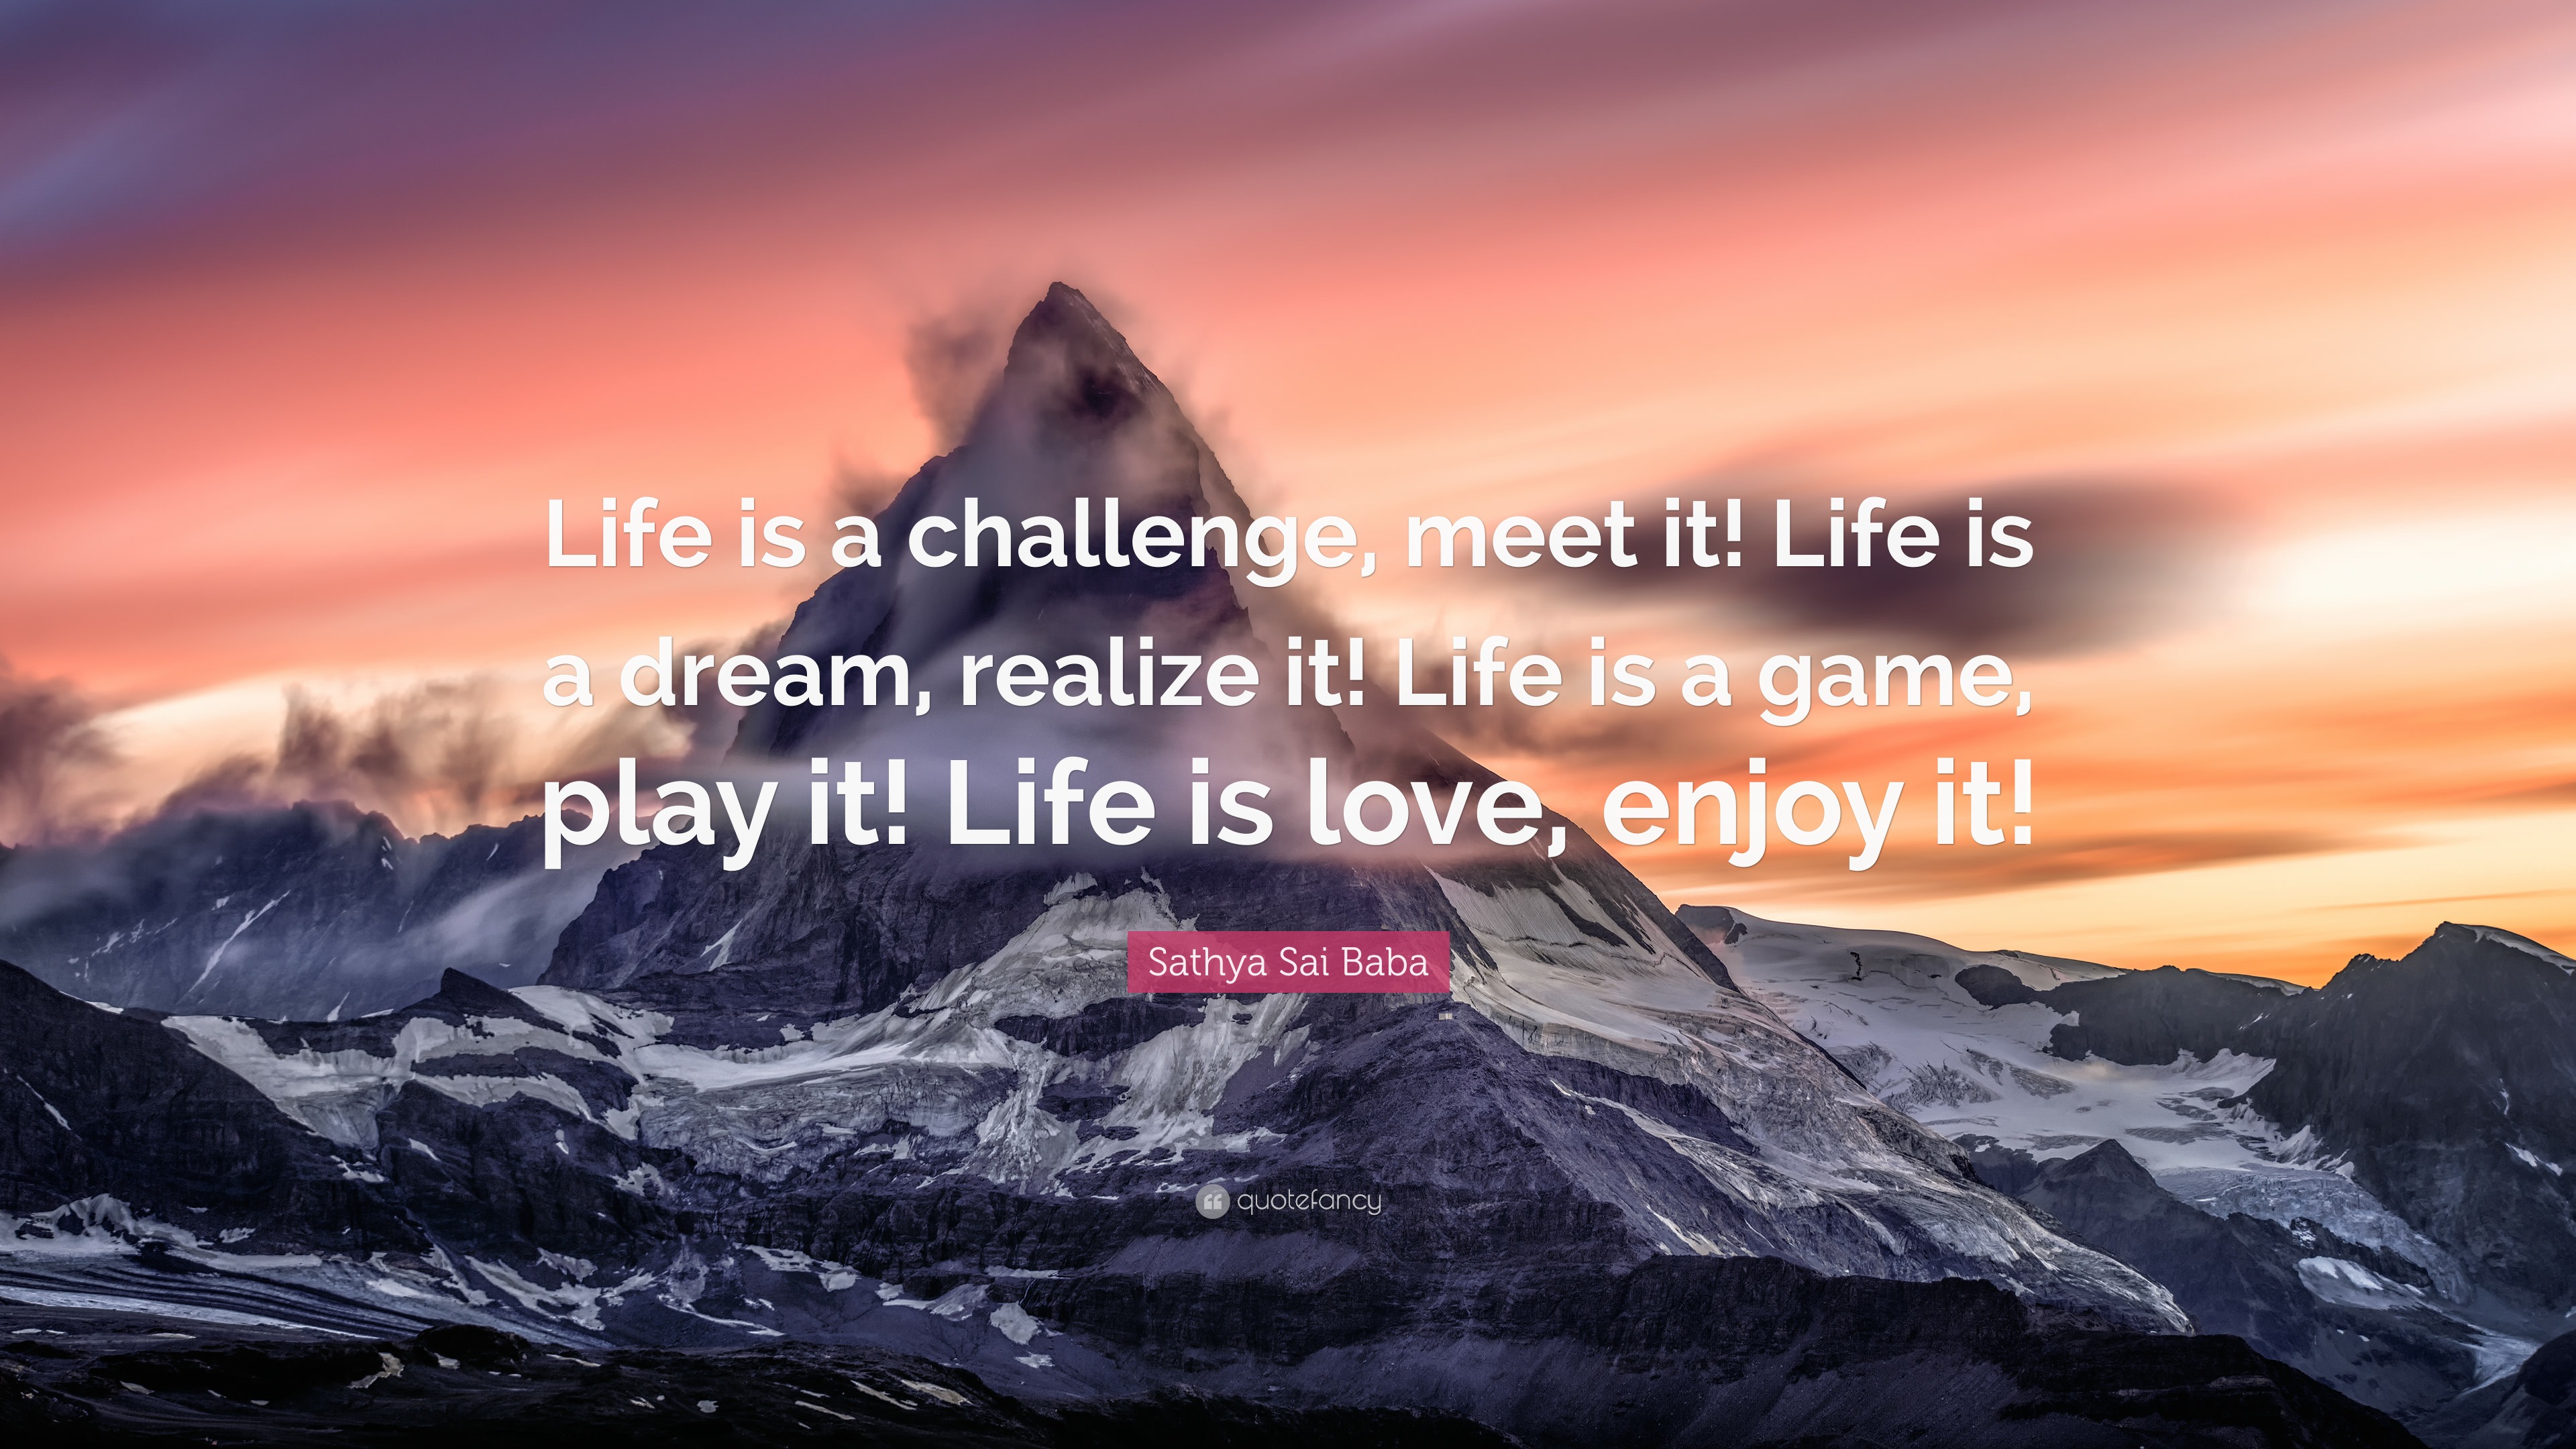 Sathya Sai Baba Quote: “Life is a challenge, meet it! Life is a dream ...